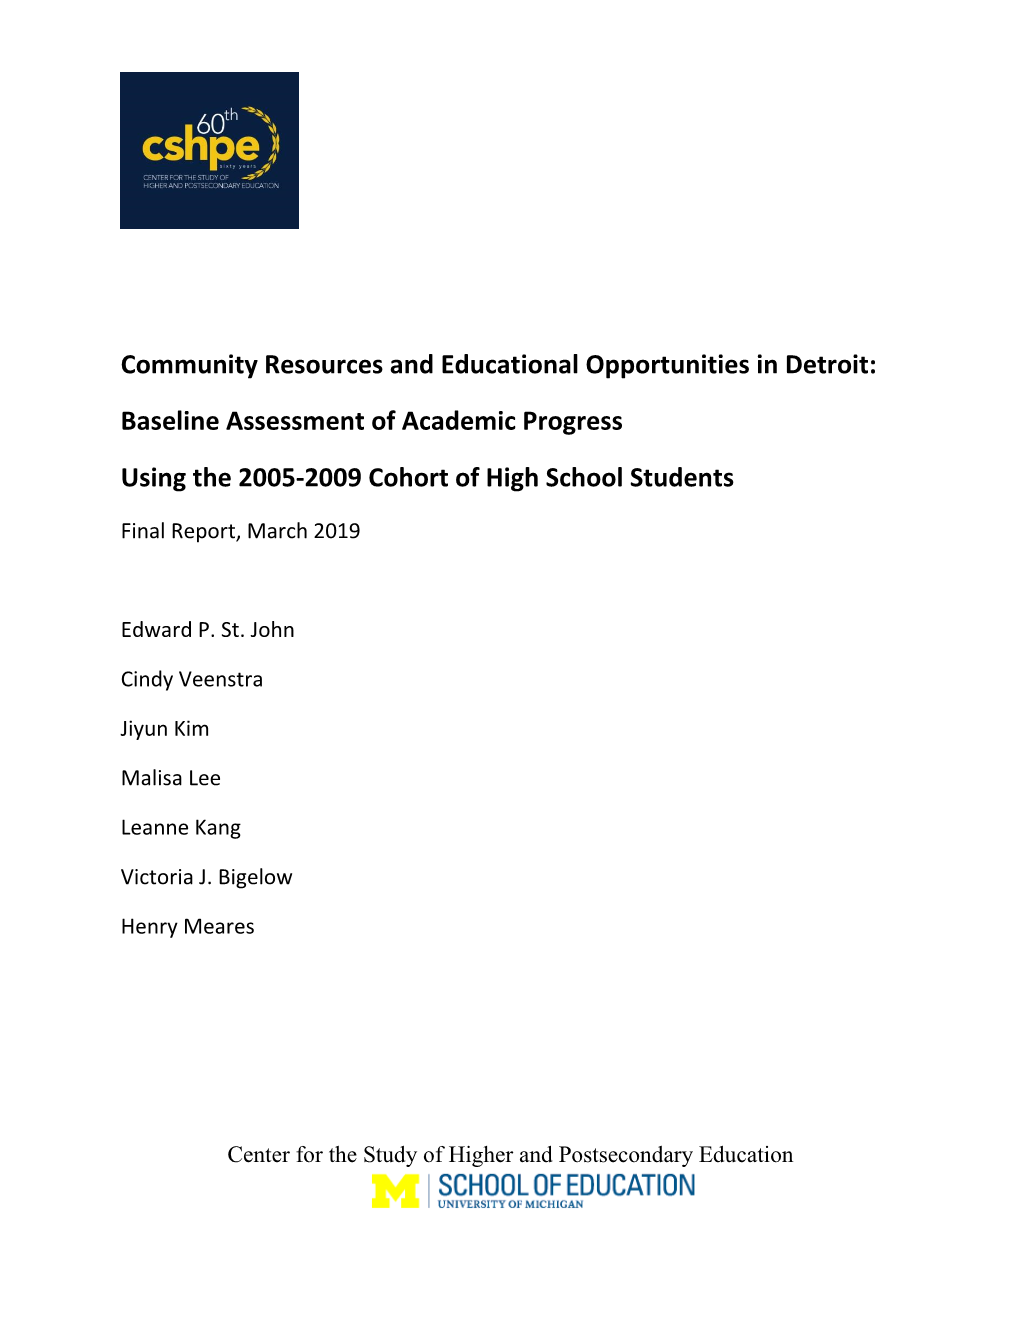 Community Resources and Educational Opportunities in Detroit: Baseline Assessment of Academic Progress Using the 2005-2009 Cohort of High School Students